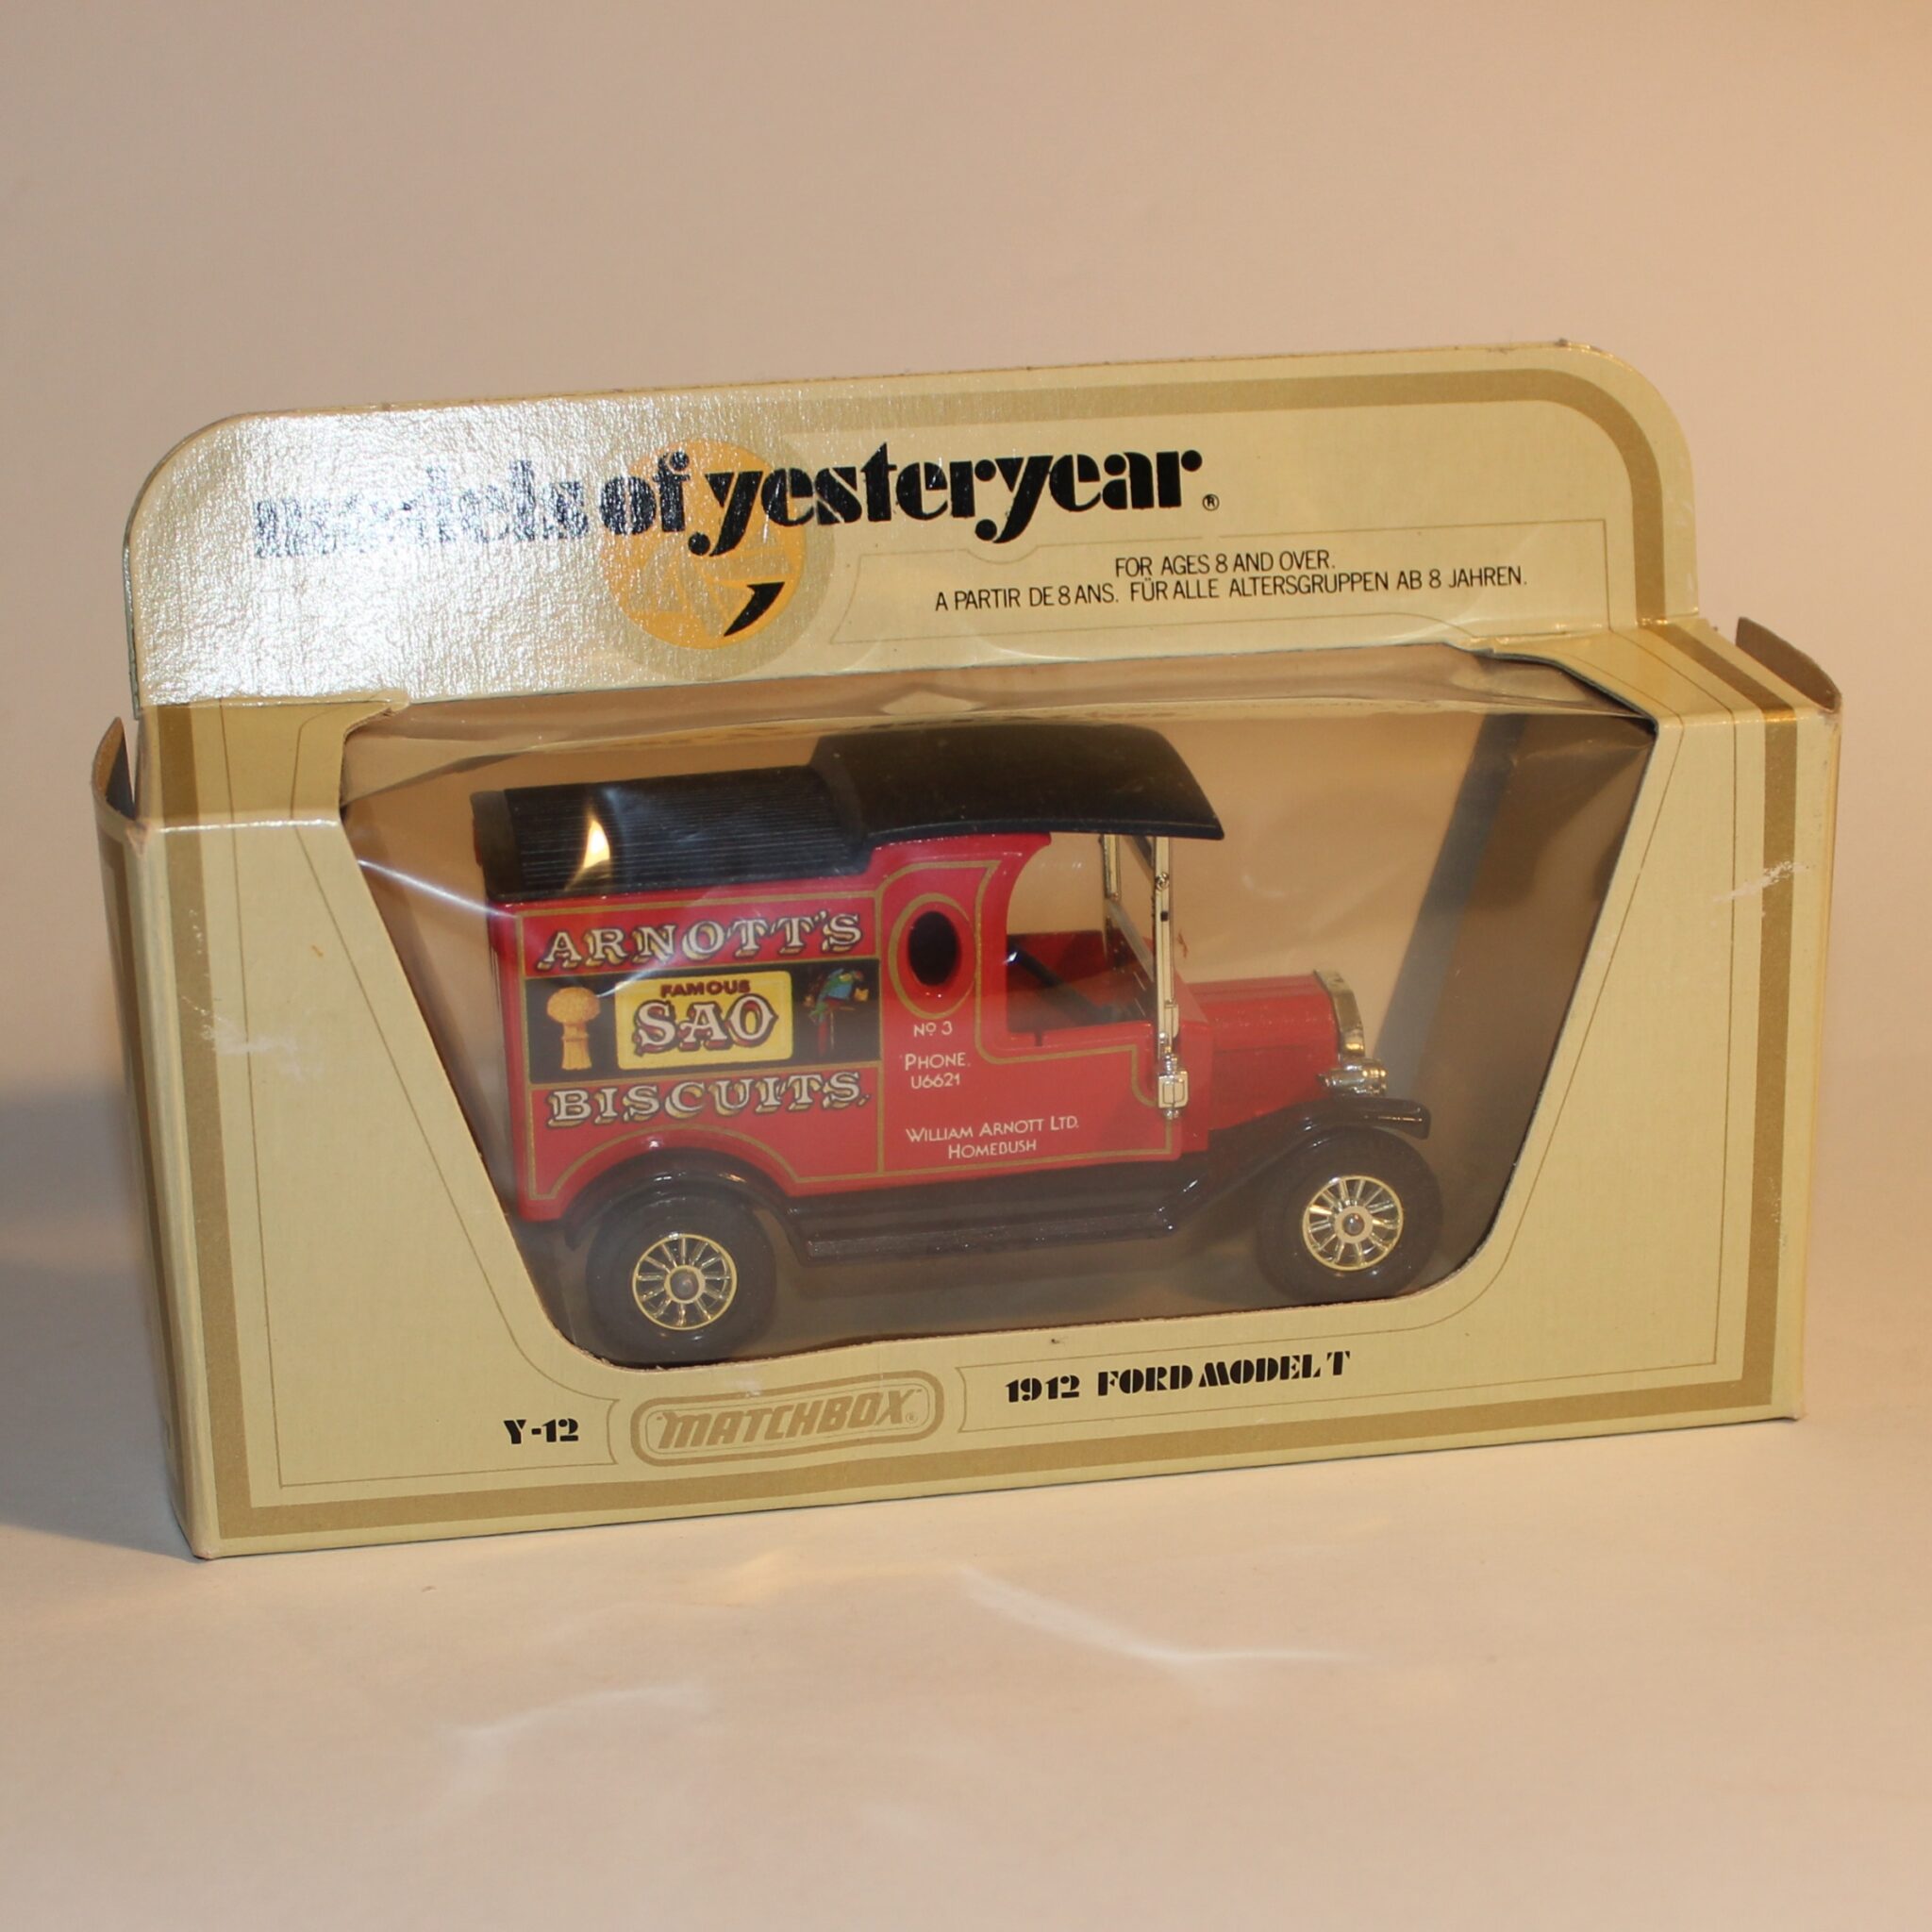 Matchbox Yesteryear Y Ford Model T Van Arnotts Livery Antique Toy World